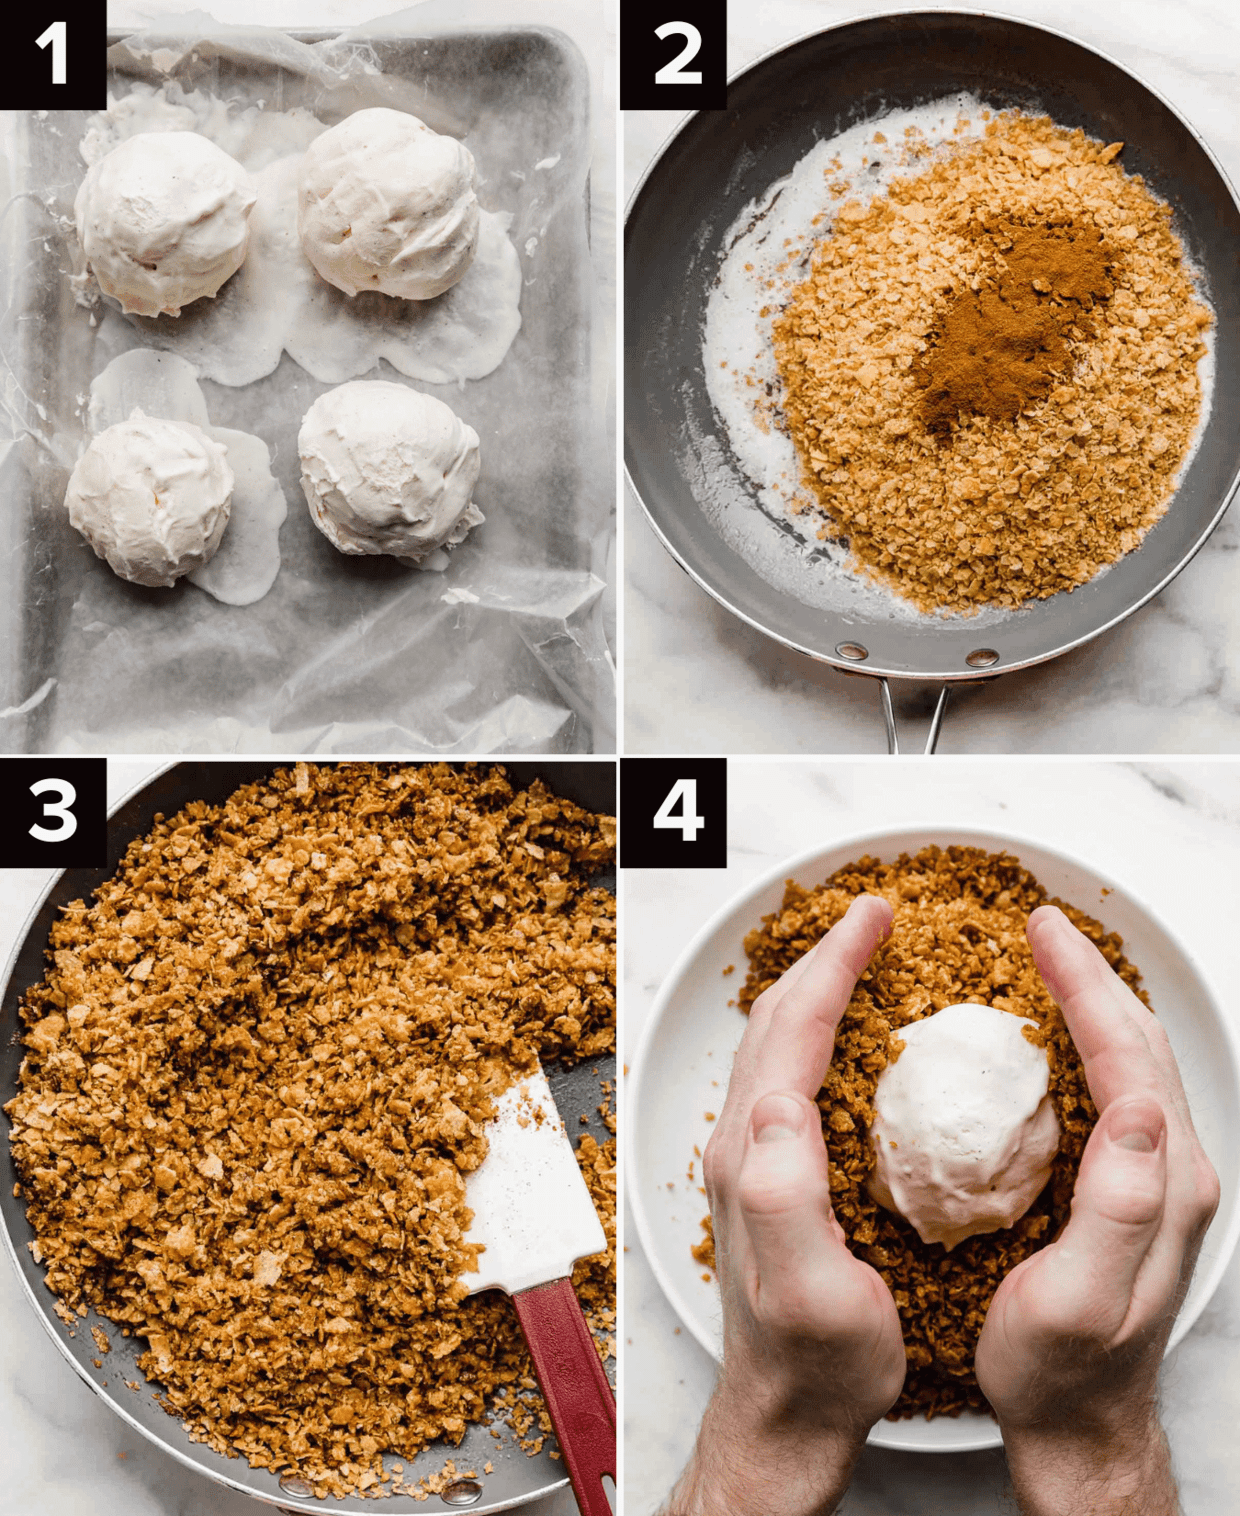 Four images showing how to make fried ice cream without frying it in oil; top left photo is 4 ice cream balls on baking sheet, top right is cornflakes in a skillet, bottom left is a cinnamon cornflake mixture, bottom right photo is hands pressing cornflake mixture against frozen ice cream ball.